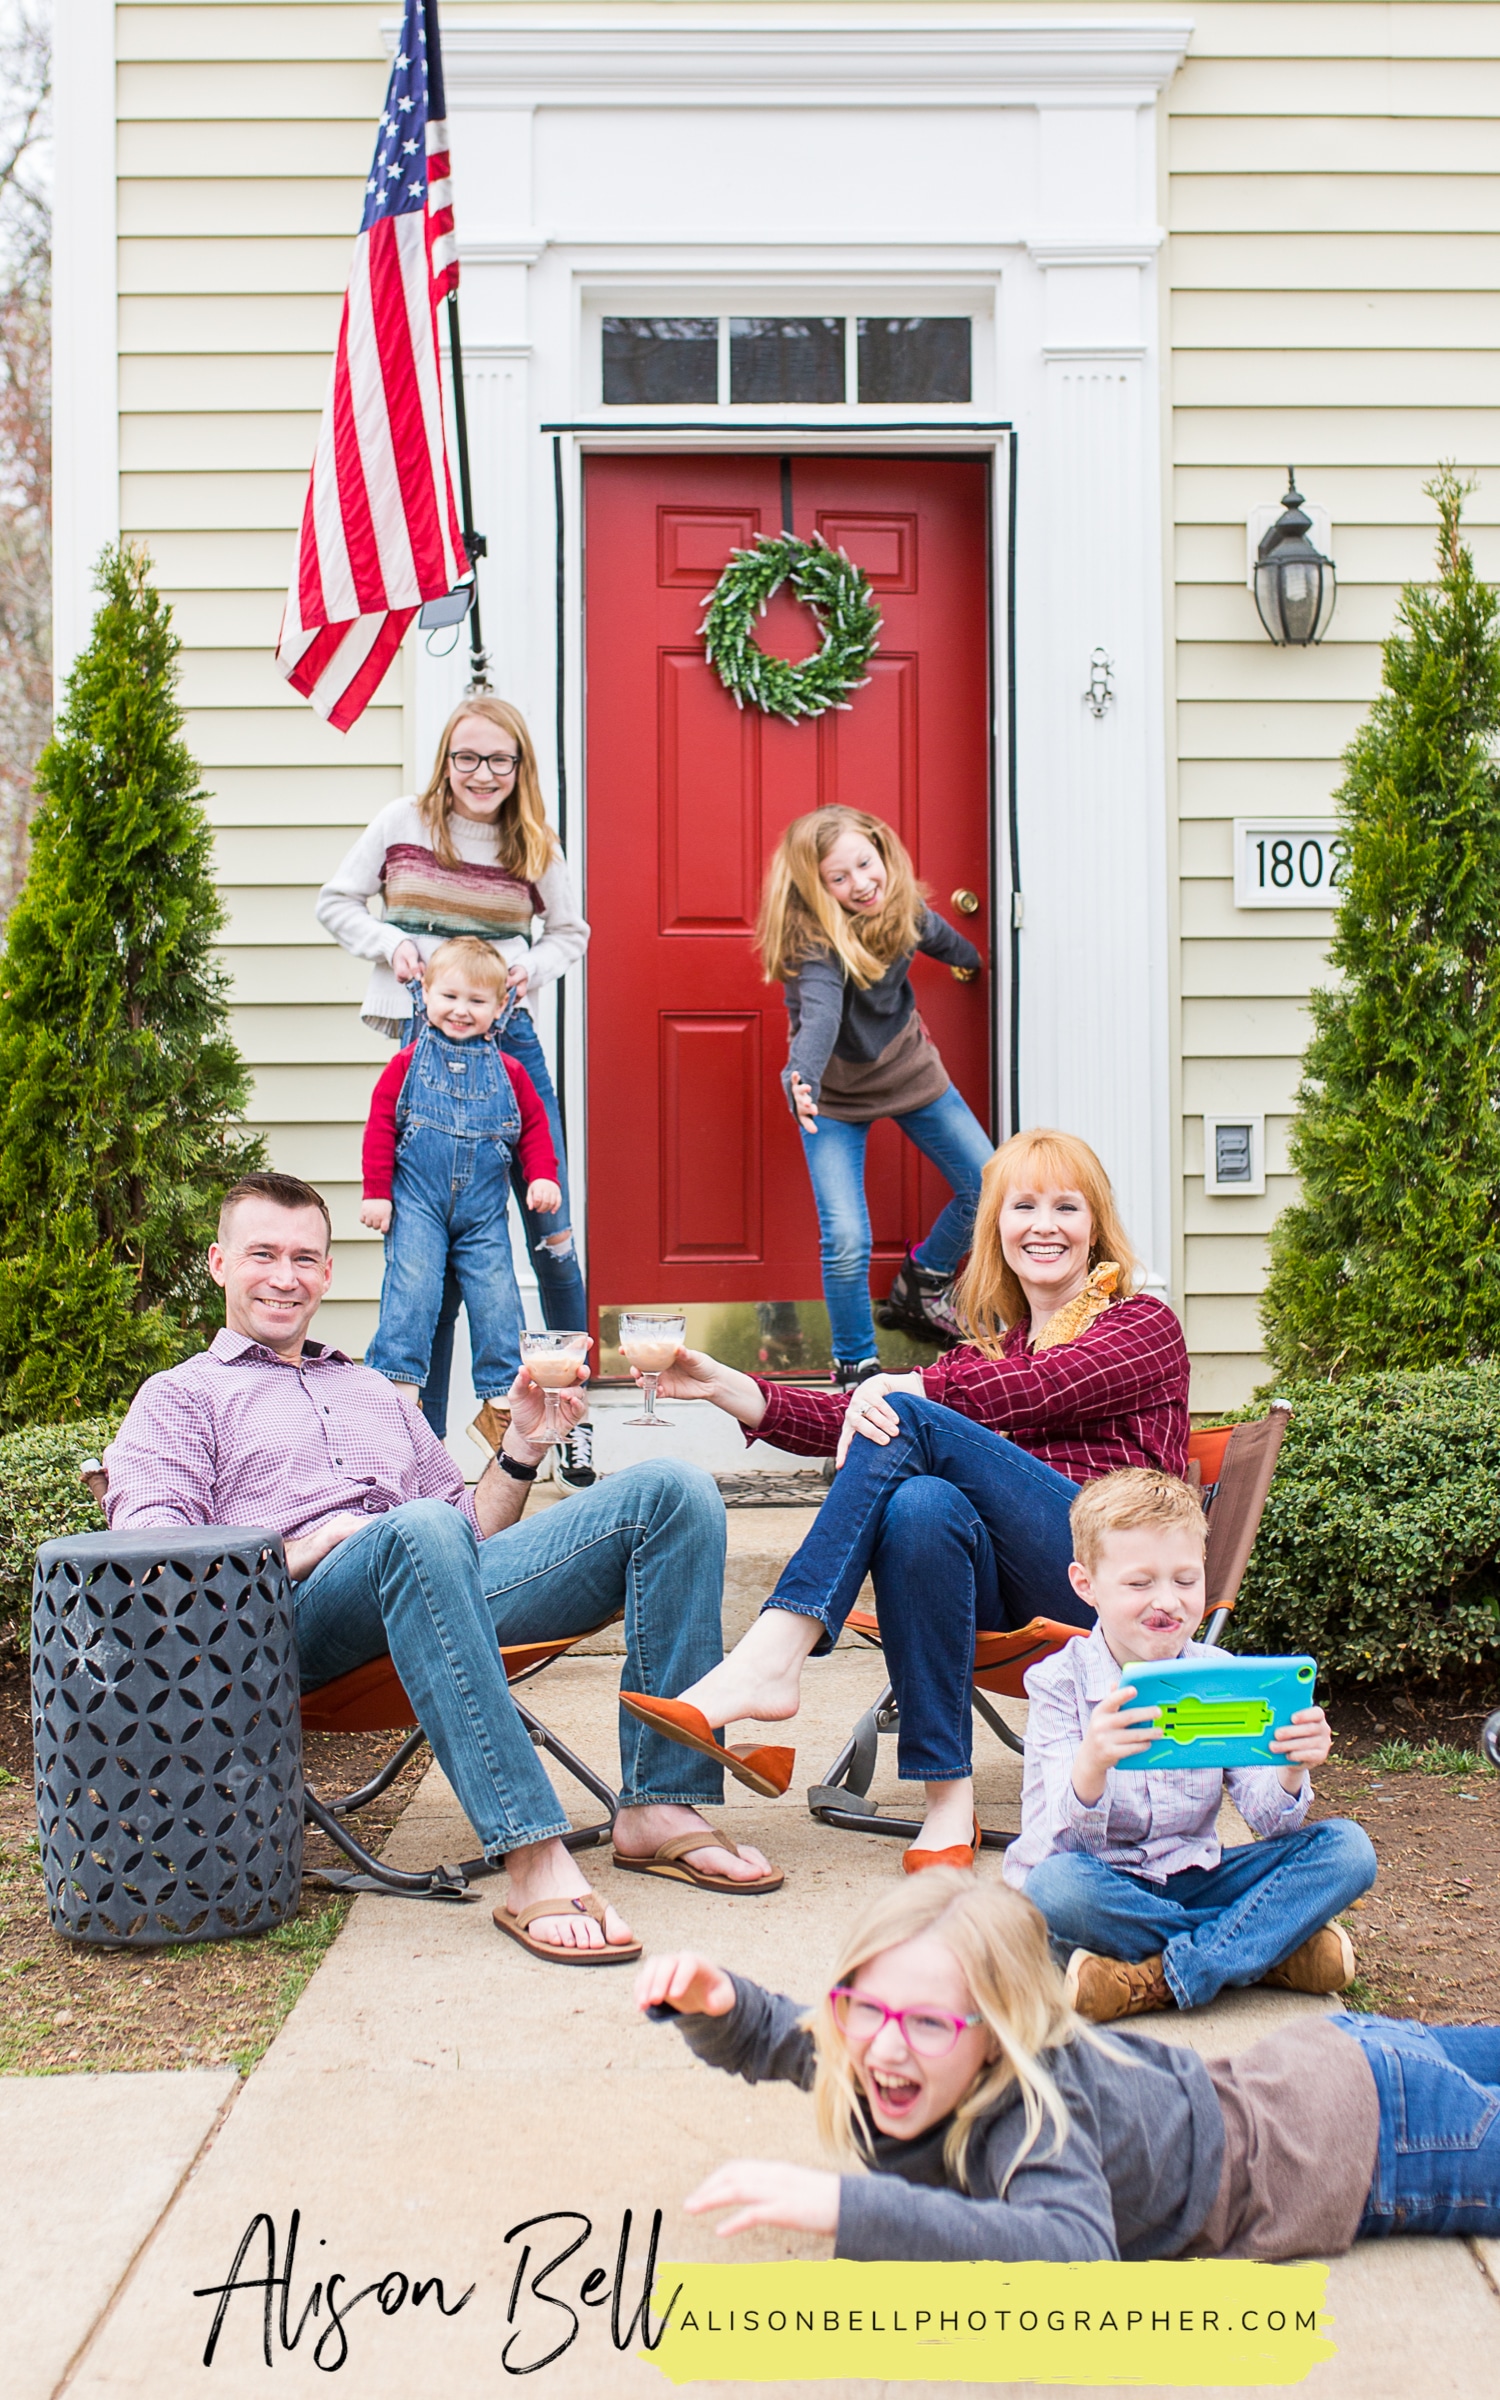 Front Porch project on Marine Corps Base Quantico in Virginia during 2020 Quarantine of Covid-19 pandemic by Alison Bell, Photographer alisonbellphotographer.com